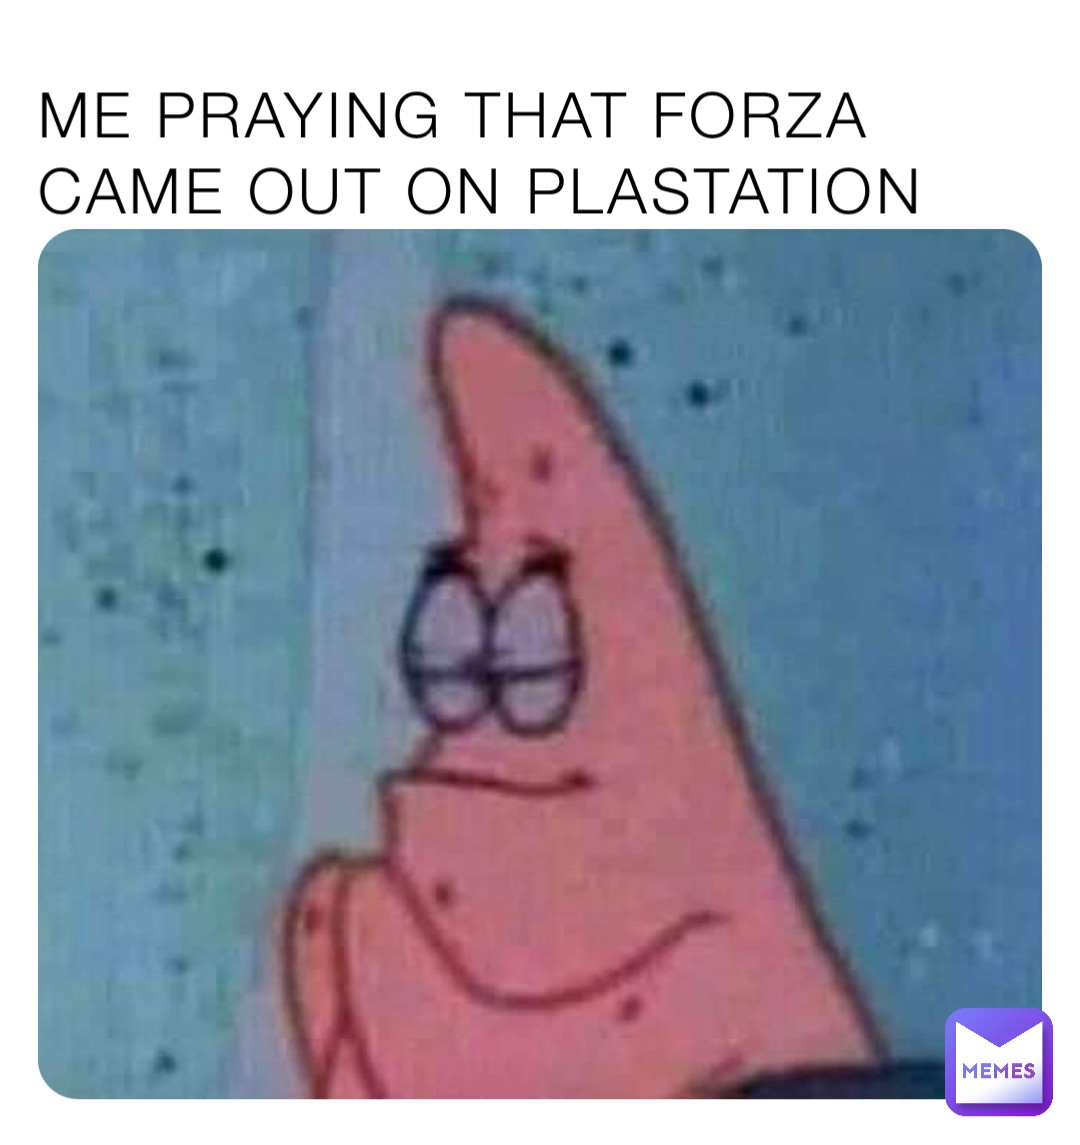 ME PRAYING THAT FORZA CAME OUT ON PLASTATION